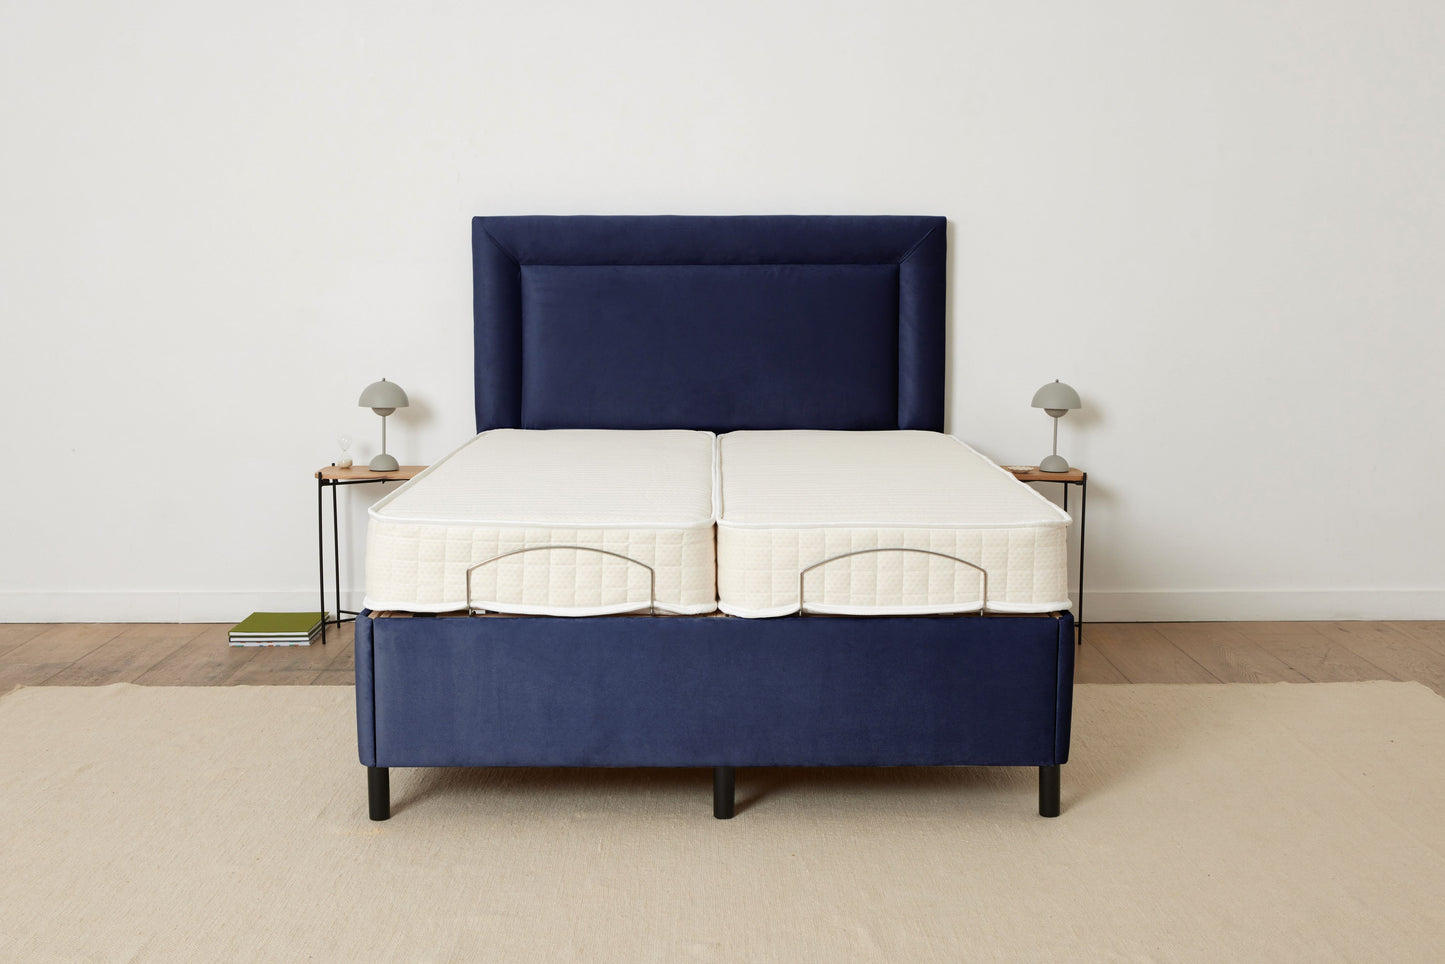 Double (5ft) Adjustable Bed - Navy